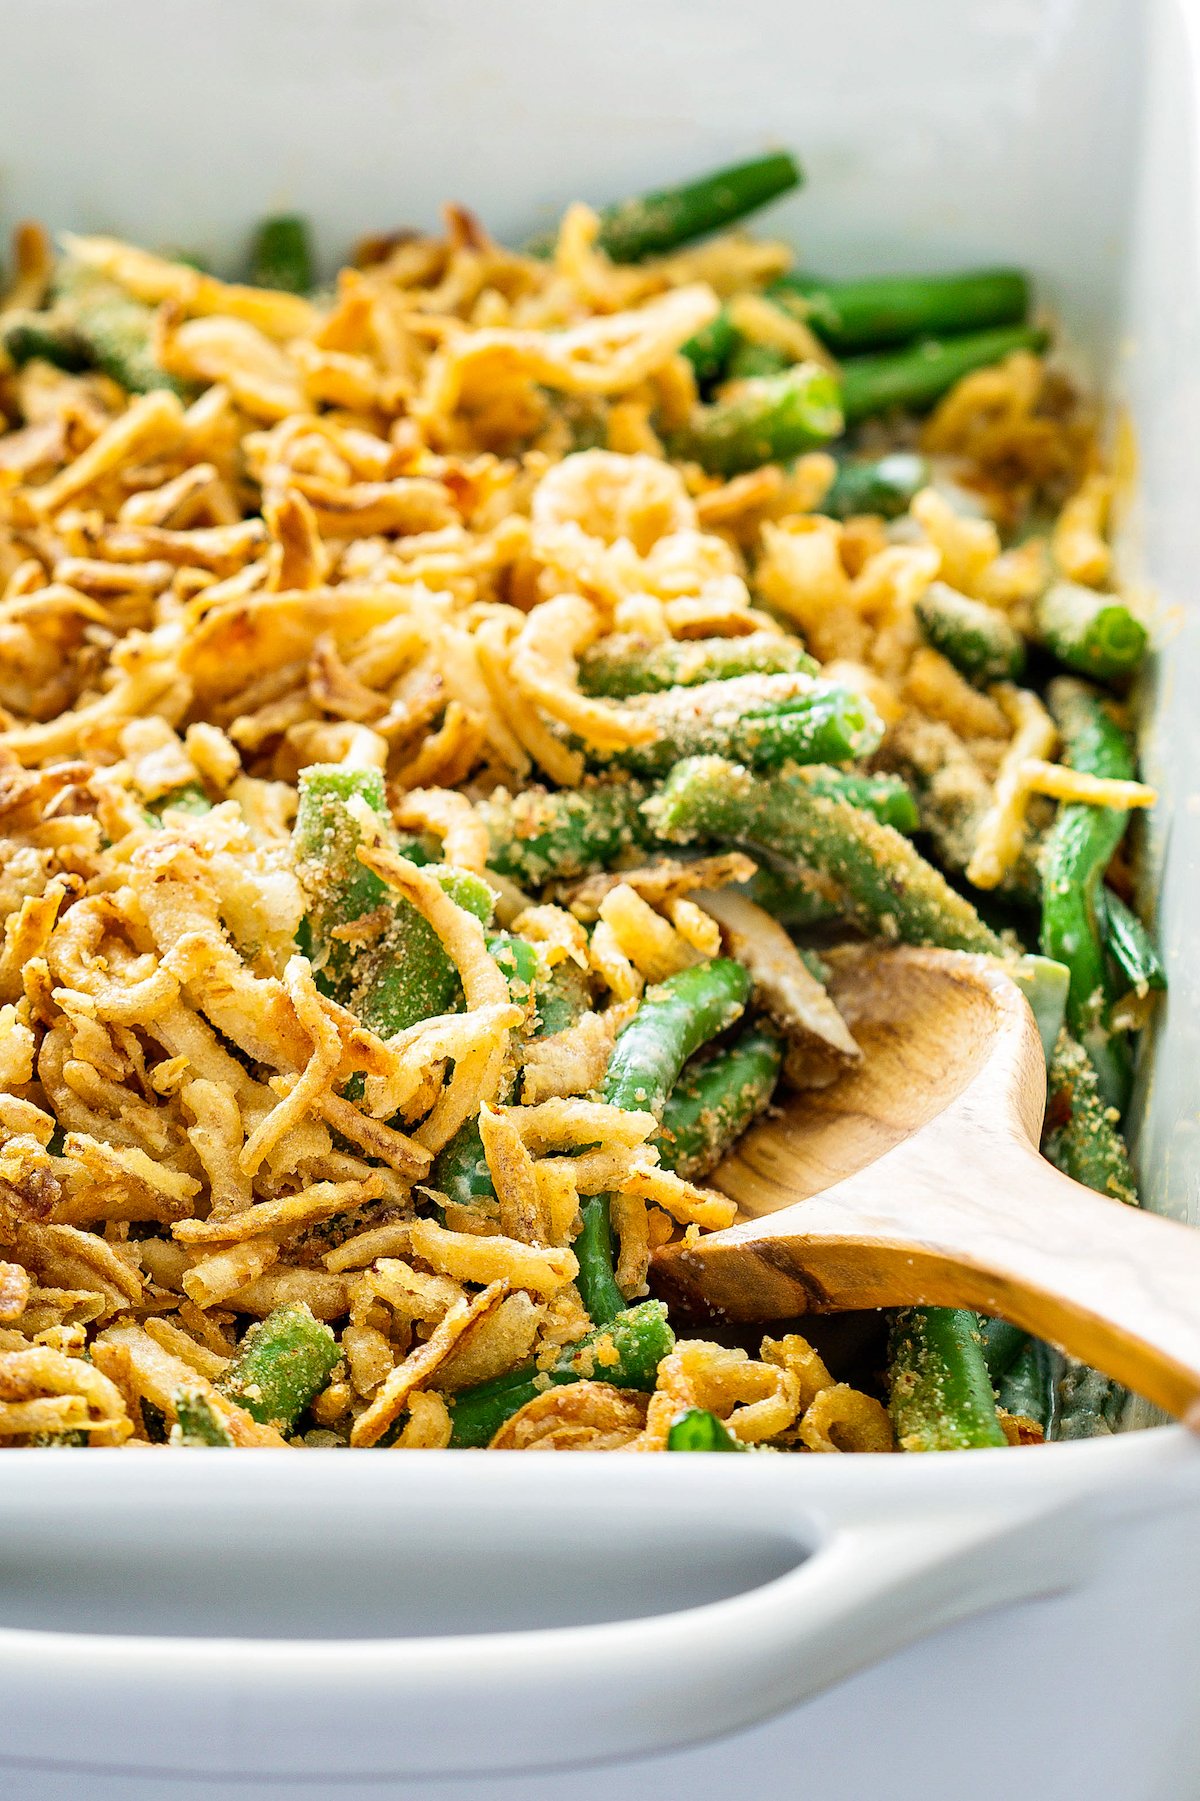 Best green bean casserole from scratch with fresh green beans and crispy fried onions baked in a white baking dish.